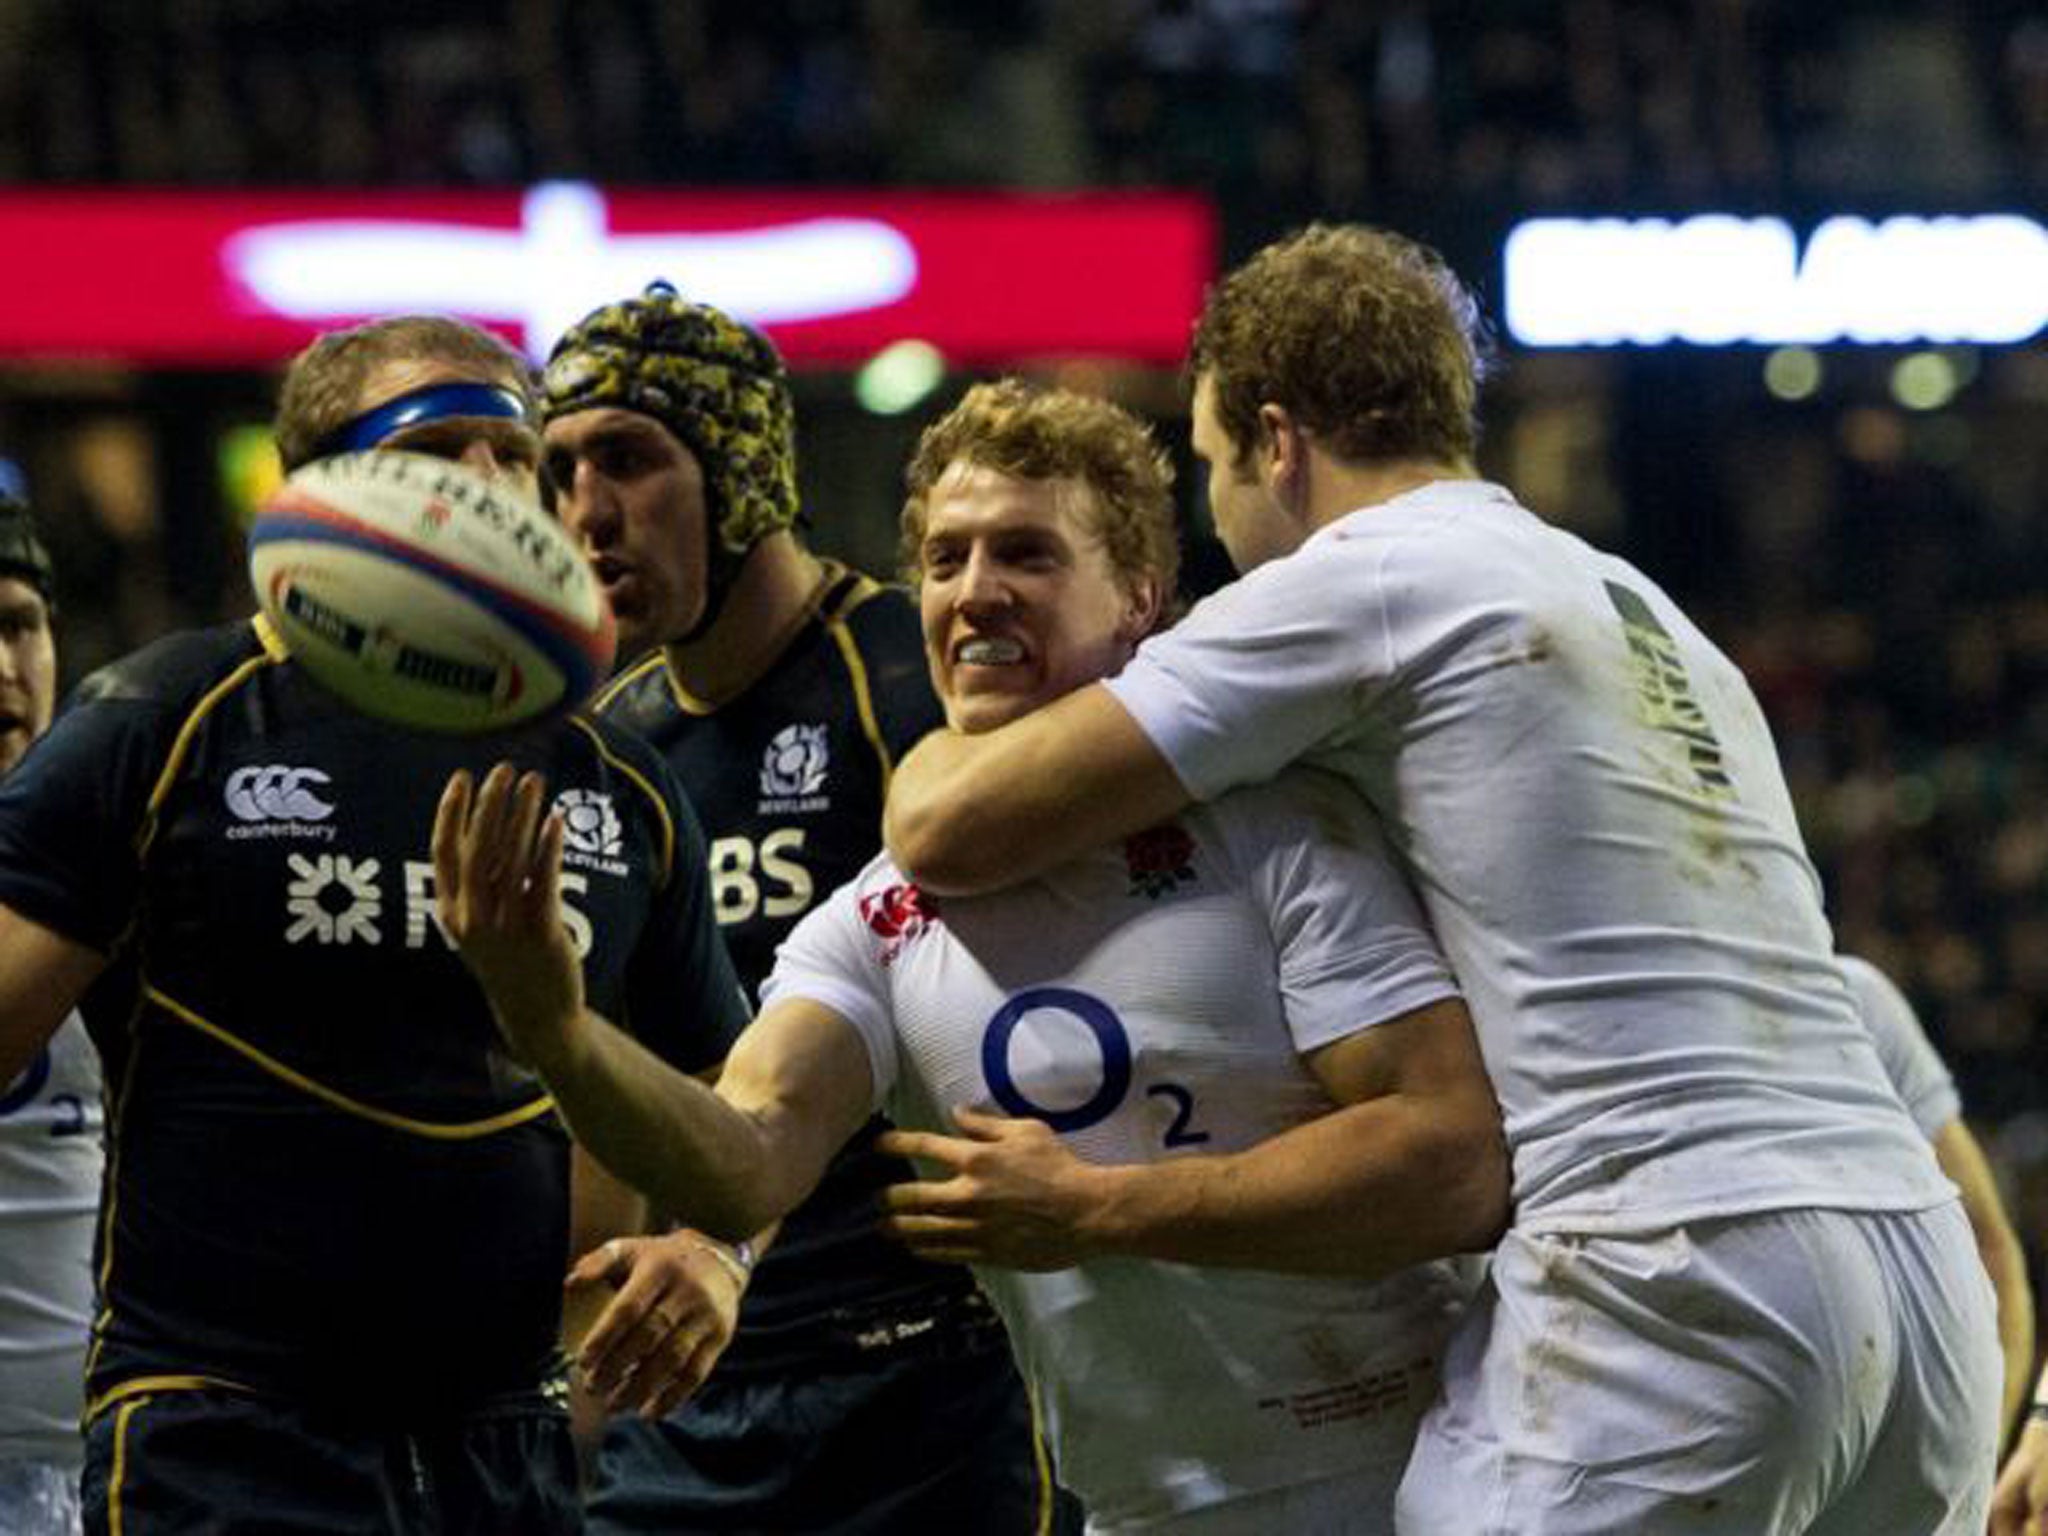 The thrilling Billy Twelvetrees can be a key indicator of England’s progress